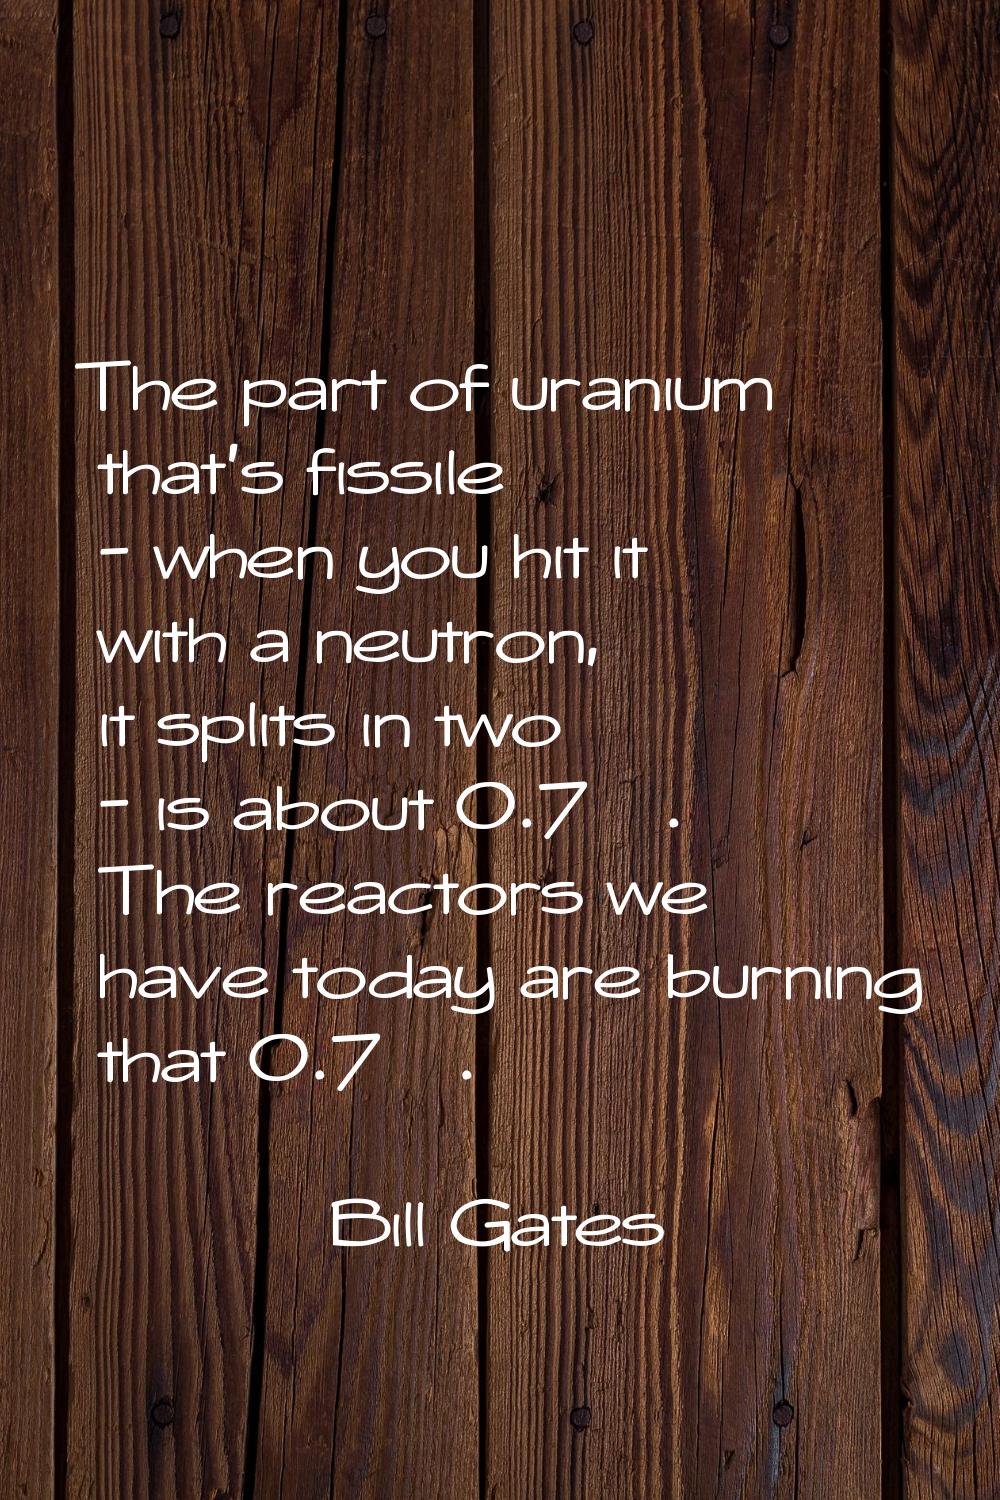 The part of uranium that's fissile - when you hit it with a neutron, it splits in two - is about 0.